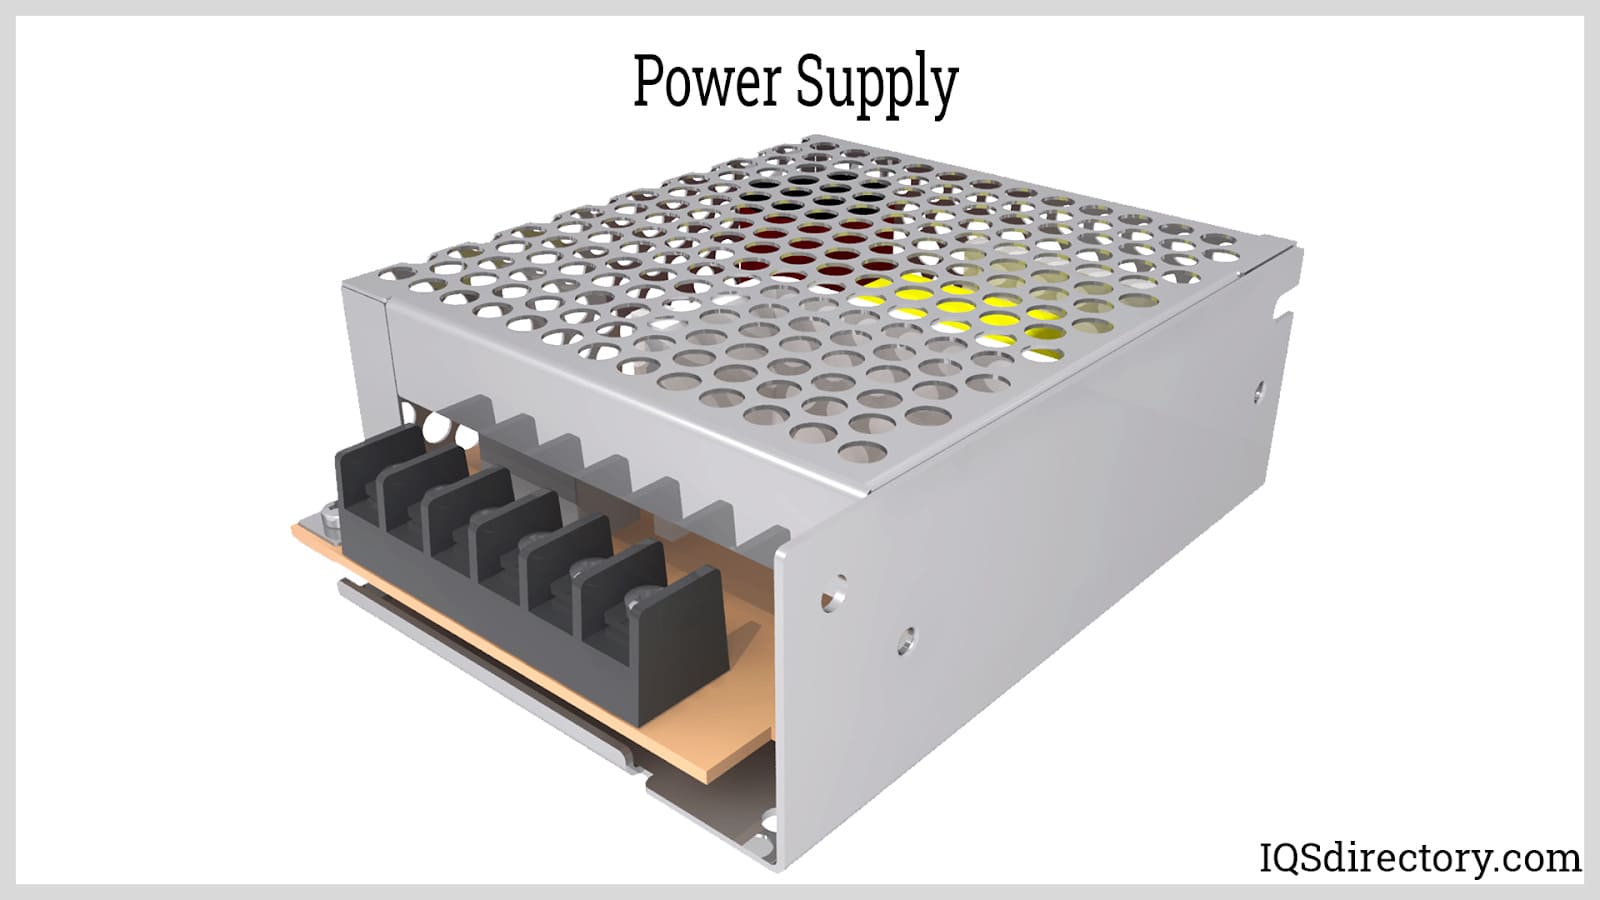 AC DC Power Supply: Types, Applications, Benefits, and Construction